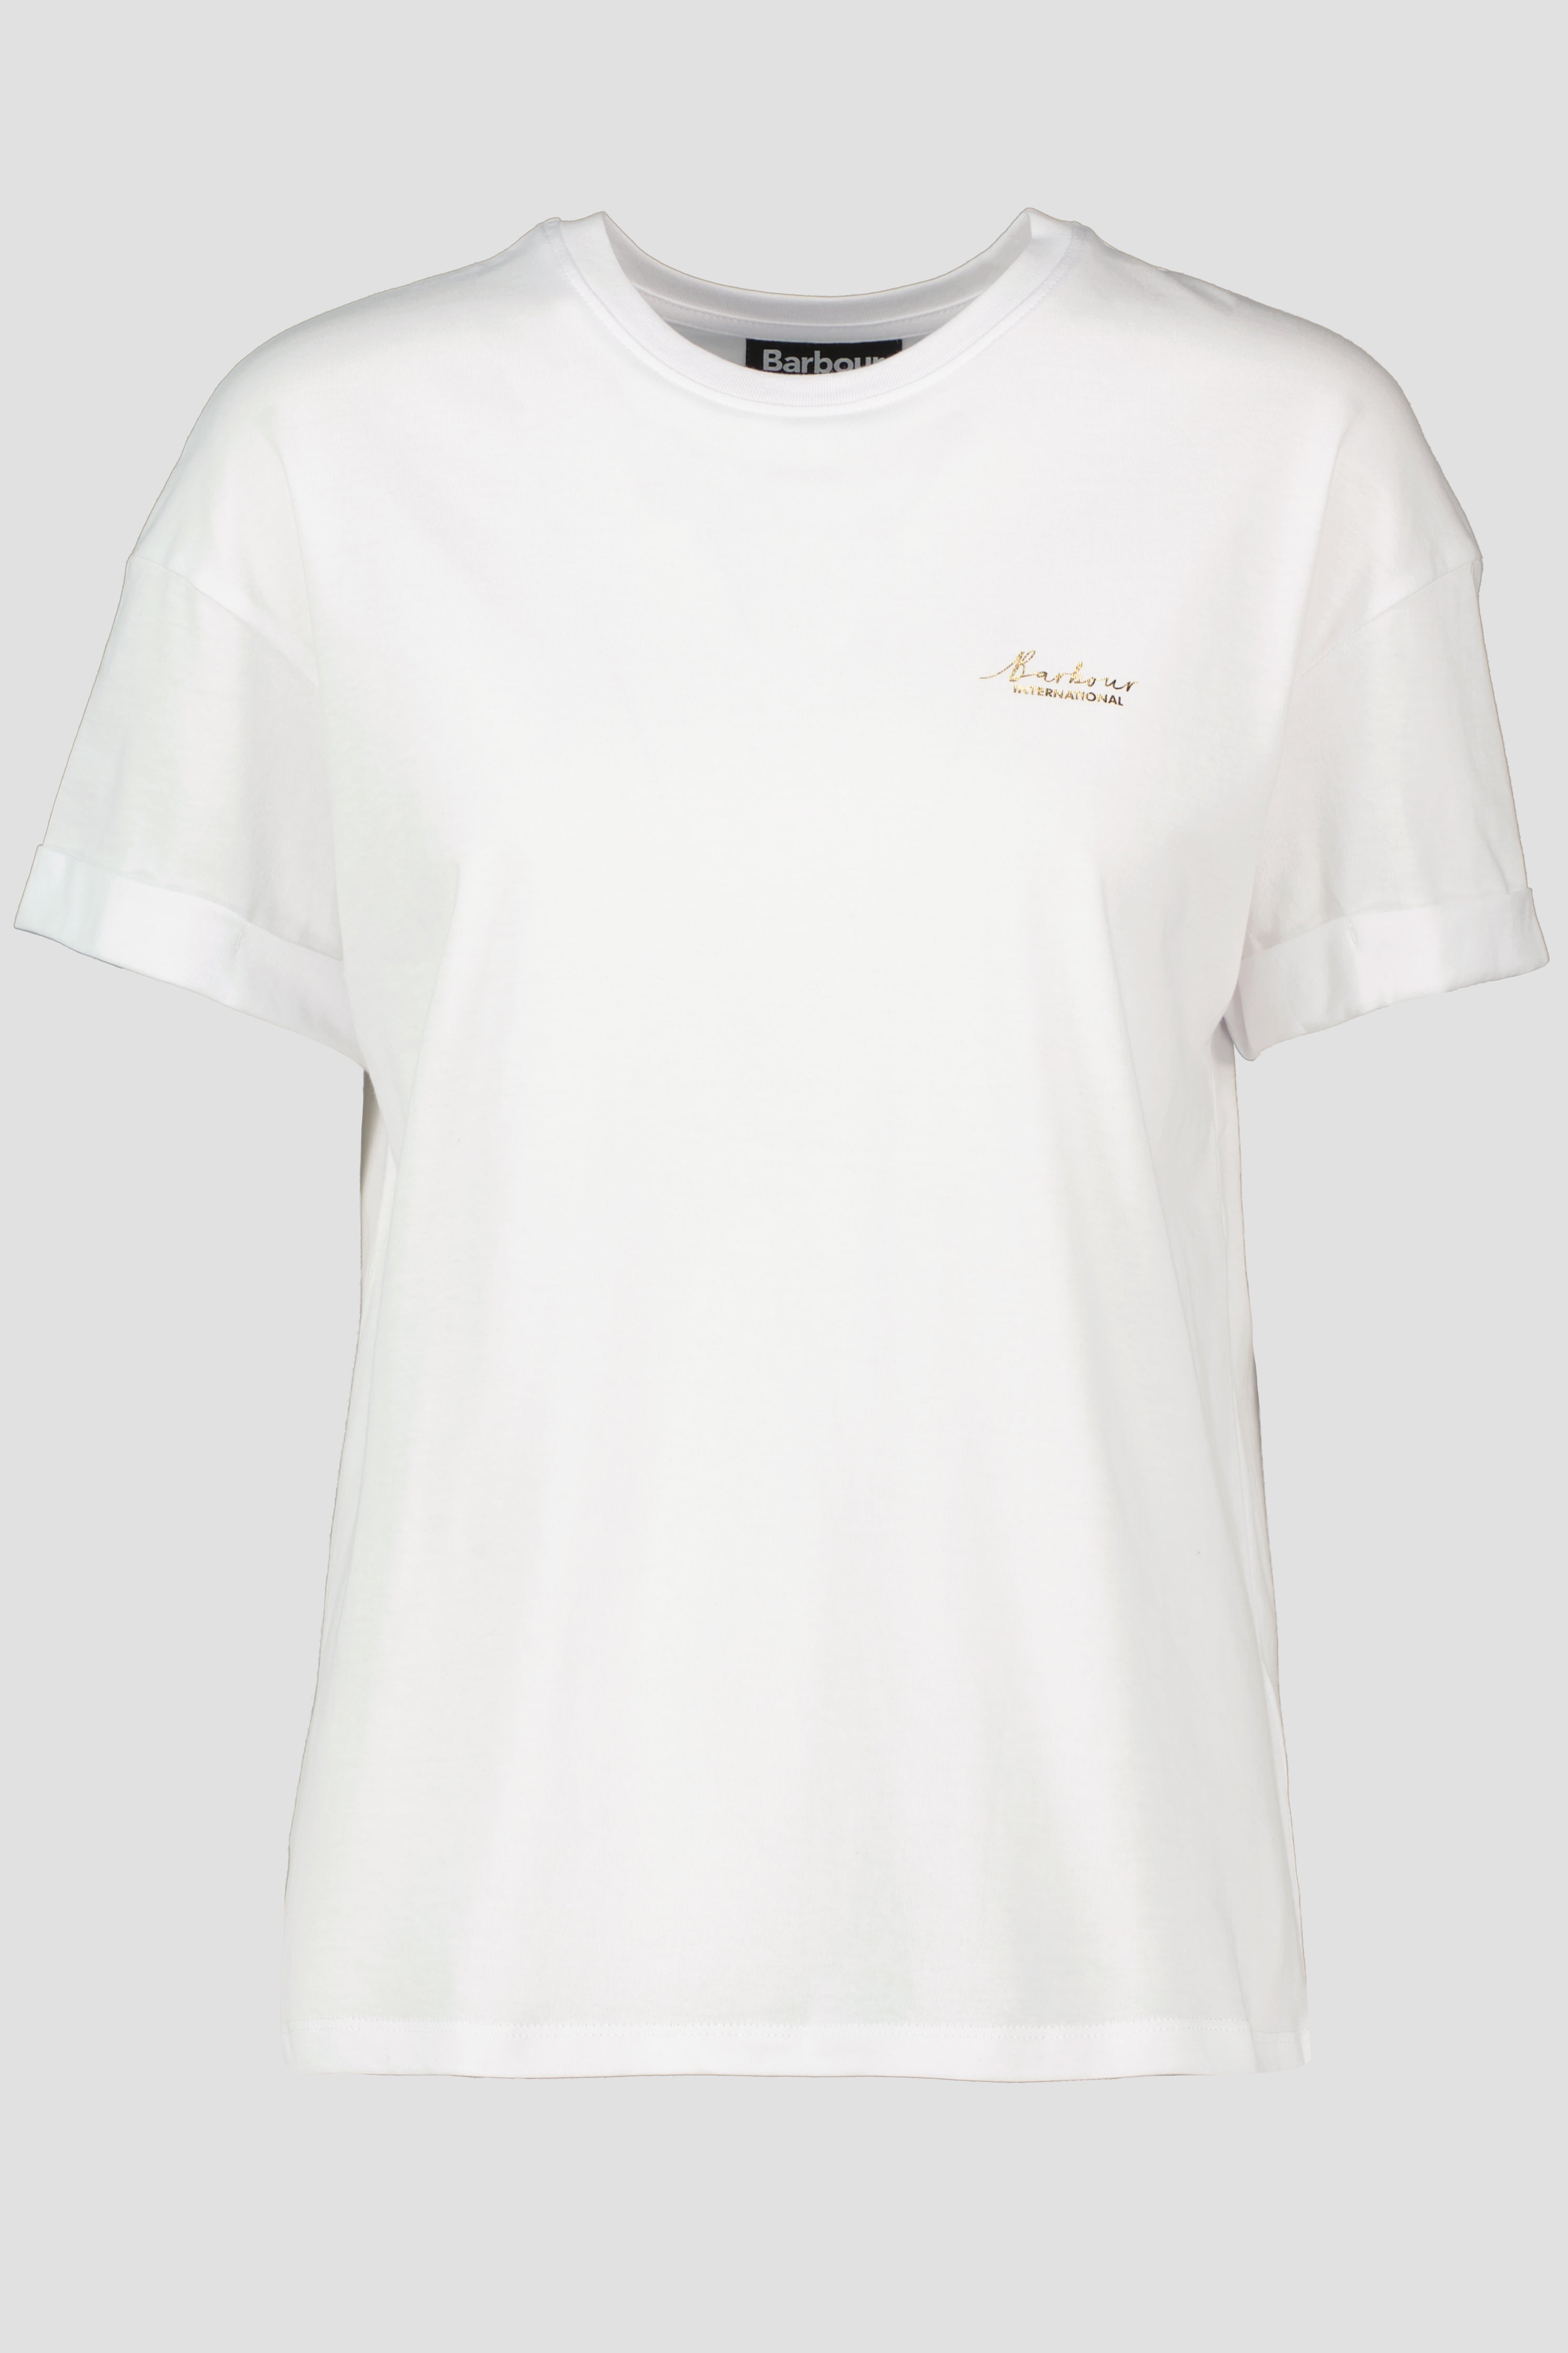 Women's Barbour White Alonso T-Shirt